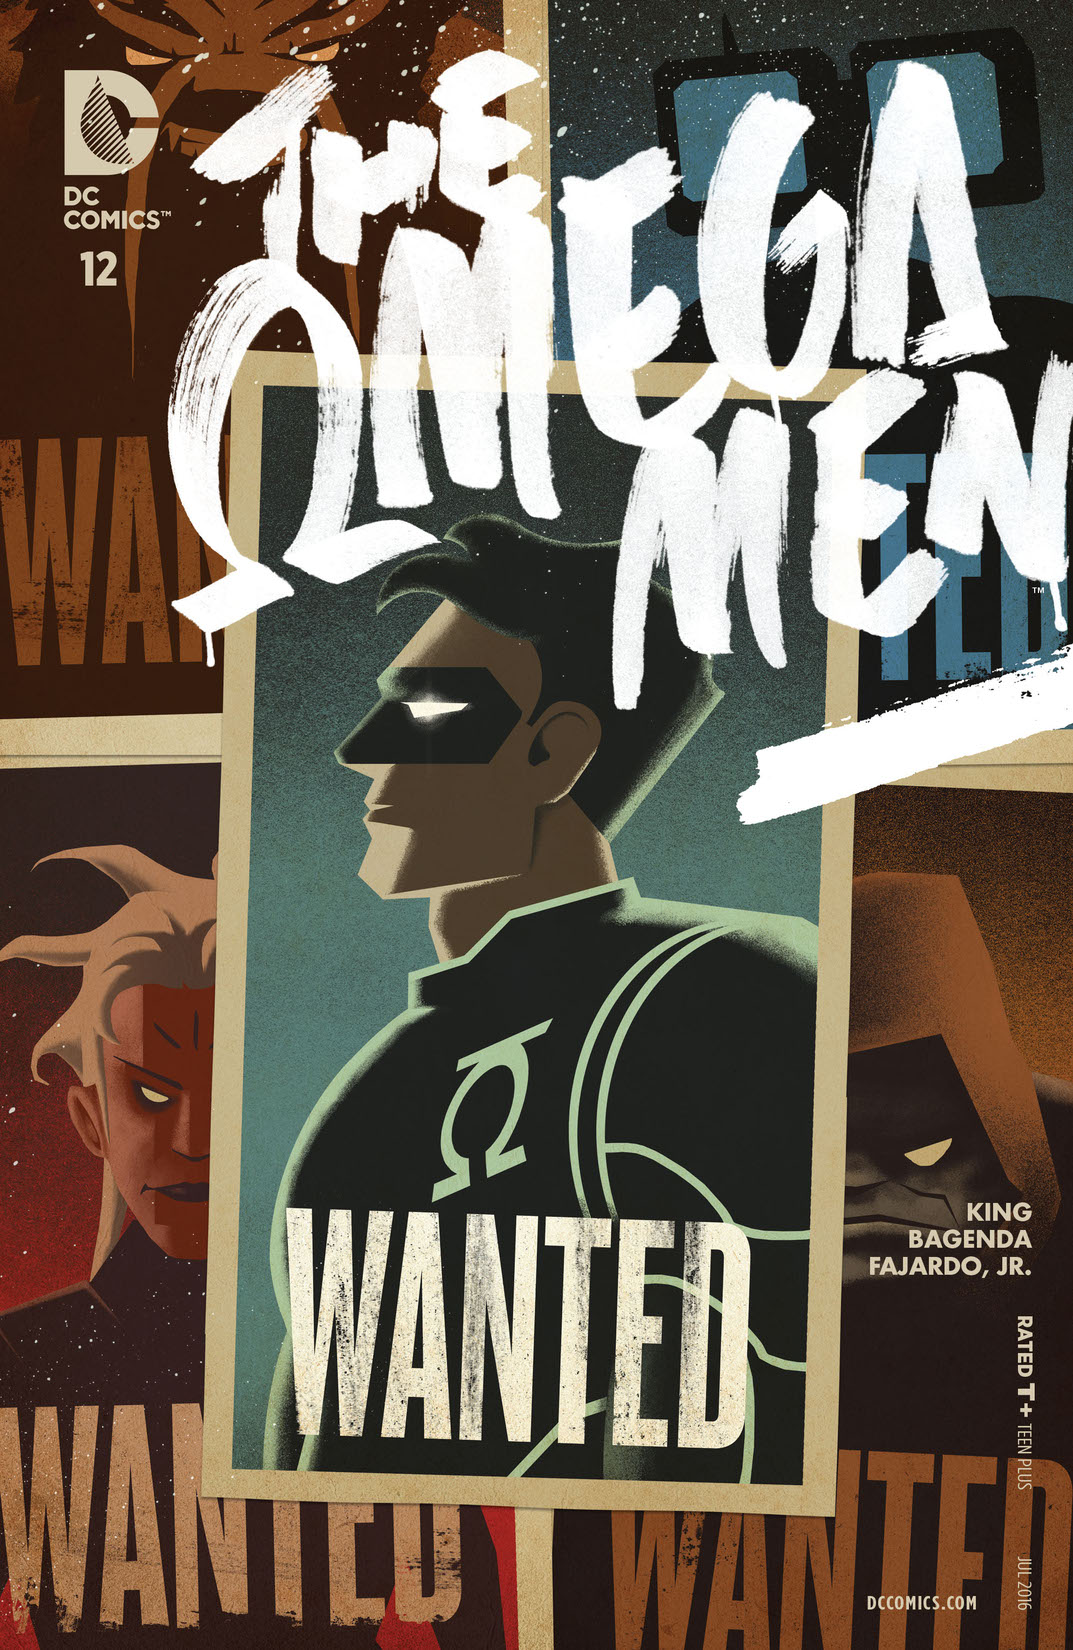 The Omega Men (2015-) #12 preview images